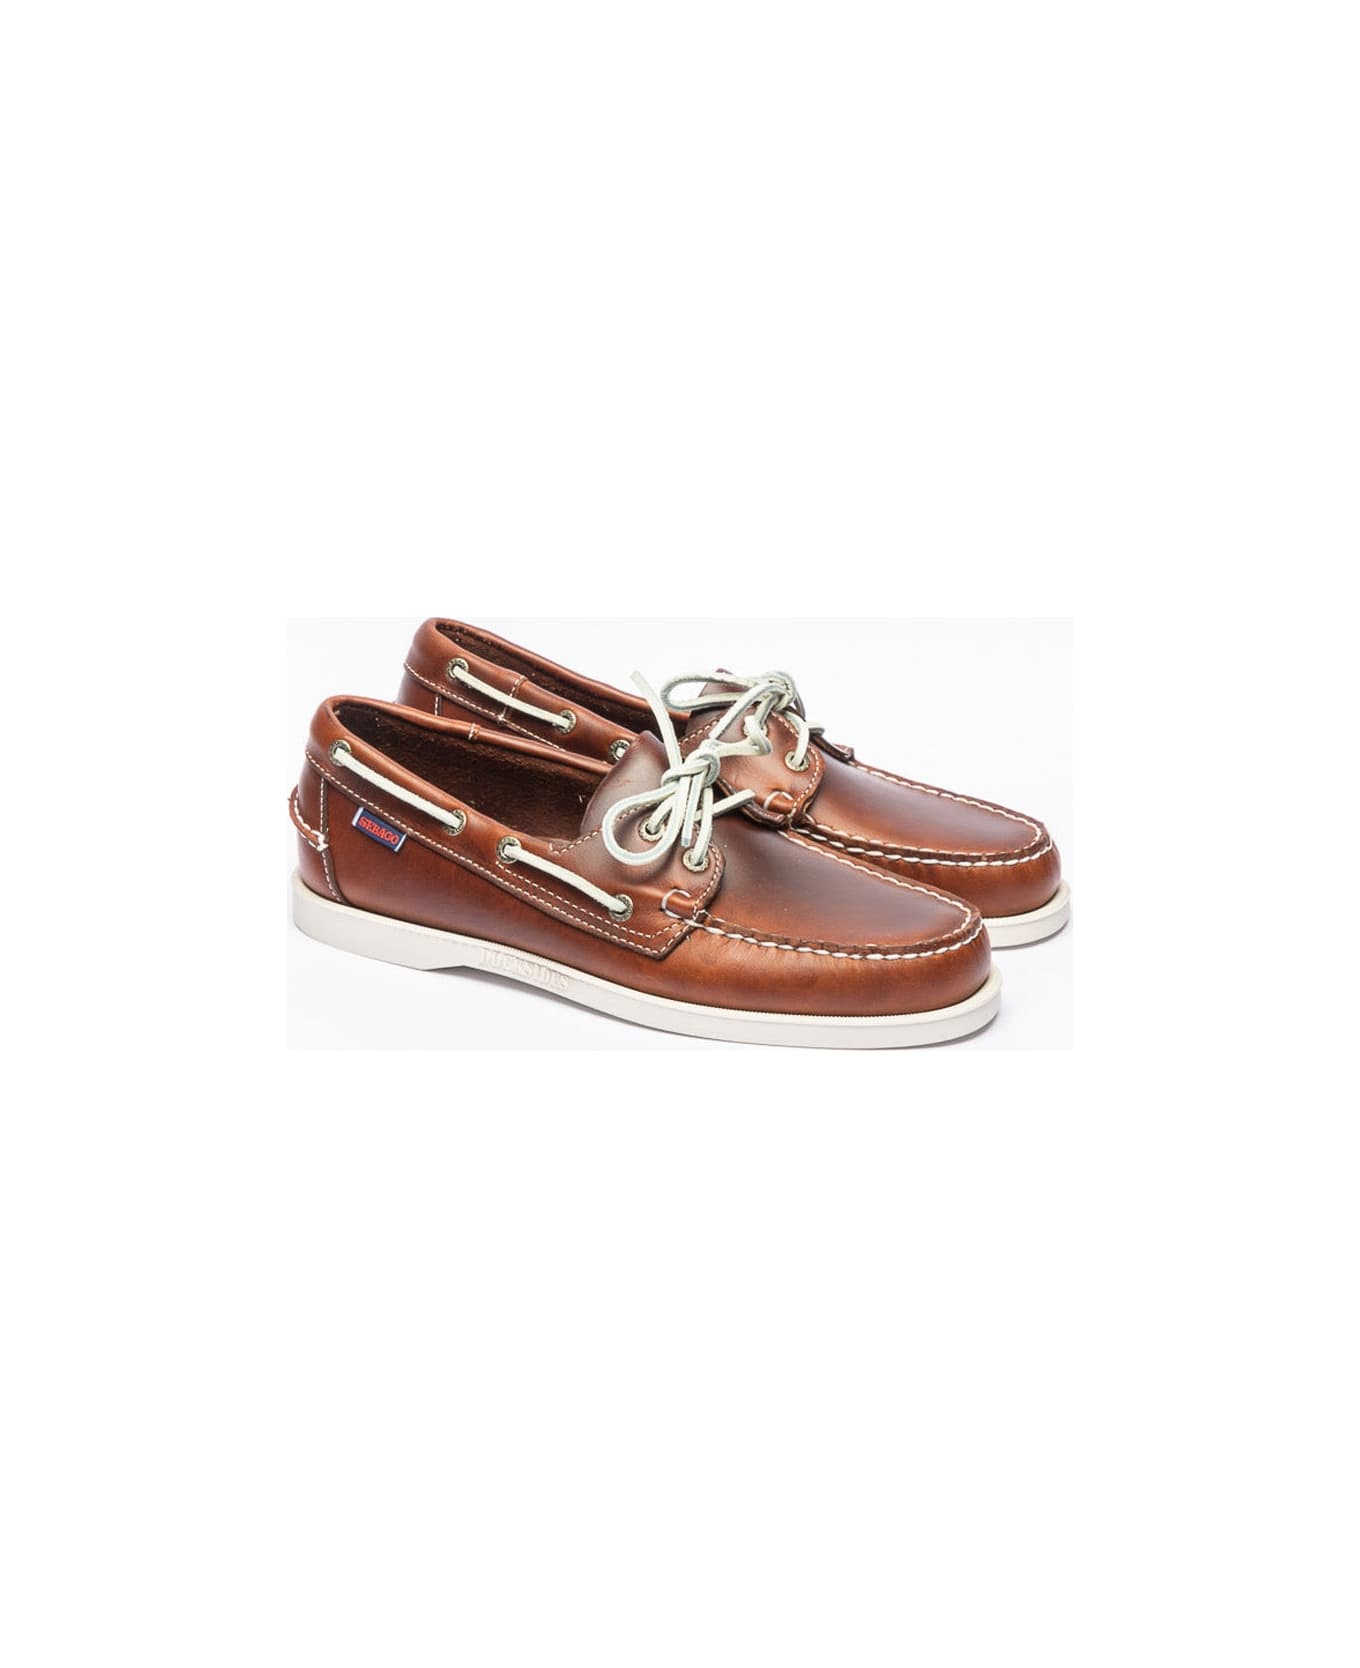 Sebago Docksides Brown Waxed Leather Loafer - Cognac ローファー＆デッキシューズ